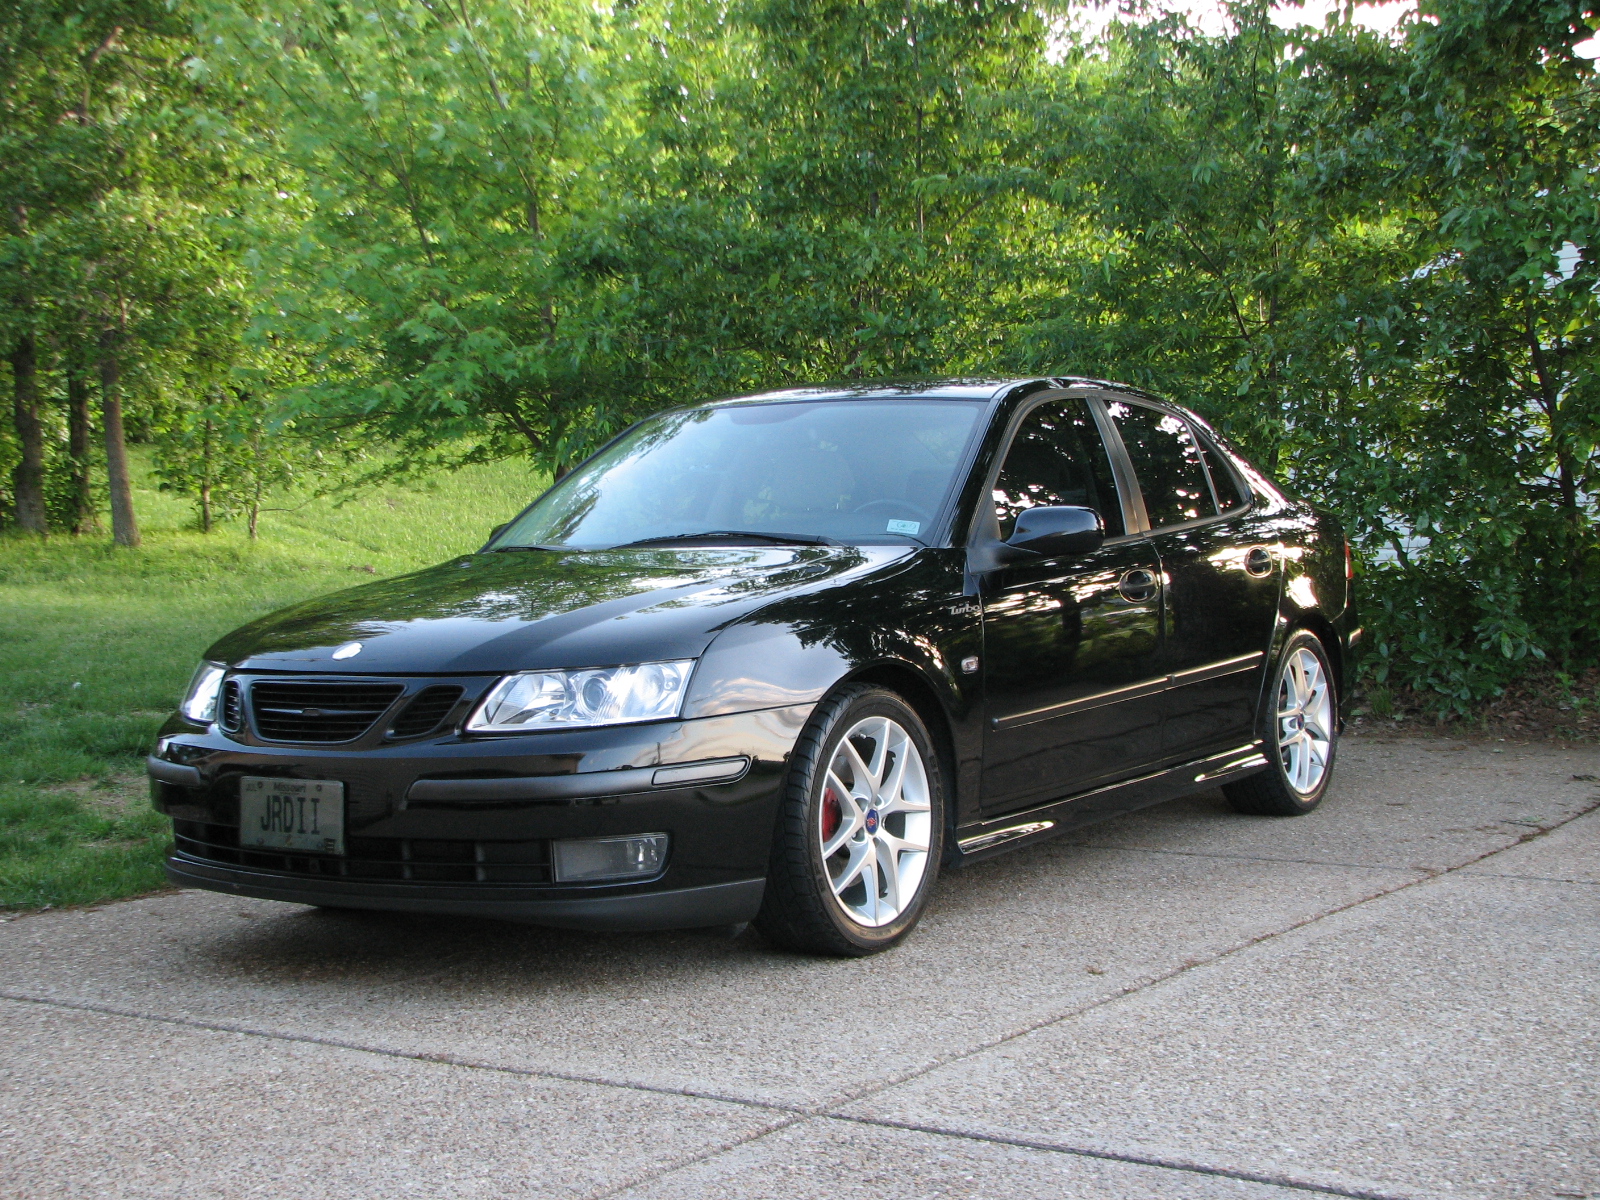 2003 Saab 9-3 Vector - Pictures - 2003 Saab 9-3 Vector picture ...